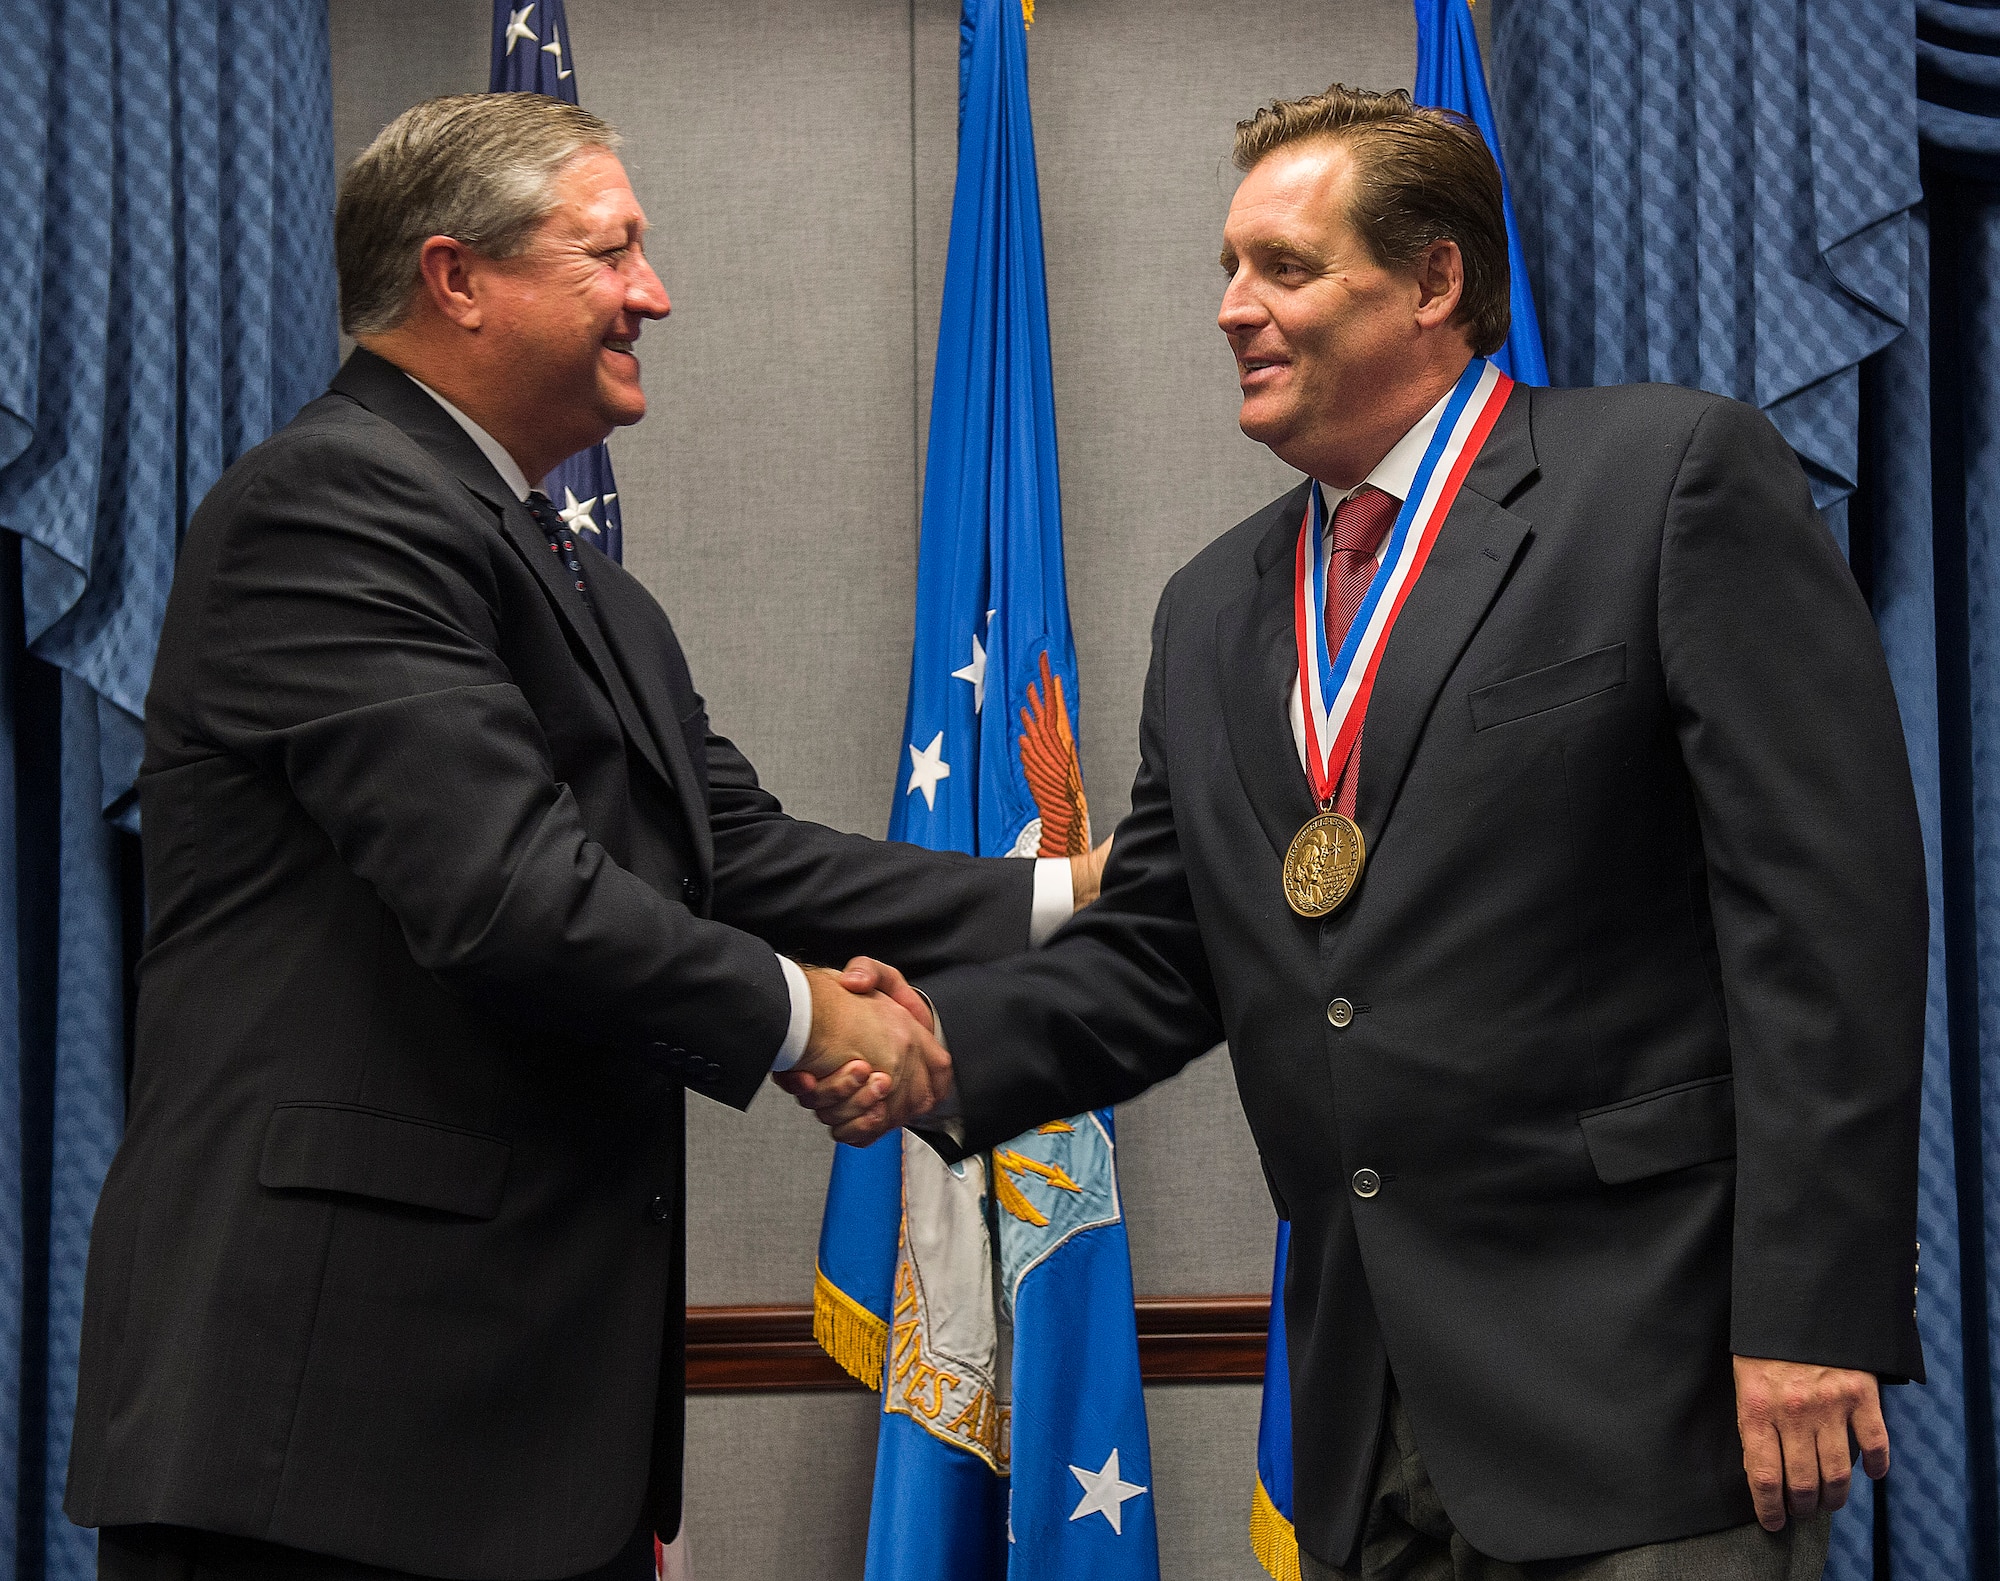 Secretary of the Air Force Michael Donley (left) congratulates Chris Sehman after presenting him with the 2011 Zachary and Elizabeth Fisher Distinguished Civilian Humanitarian Service Award during a ceremony held in the Pentagon, Washington, D.C., Jan. 10, 2013. Sehman distinguished himself as a local community and business leader in the Florida Emerald Coast area. He served as an Honorary Commander for the 36th Electronic Warfare Squadron at Eglin Air Force Base, and the 1st Special Operations Wing at Hurlburt Field, Fla., and was a staunch advocate for the Special Operations Warrior Foundation and Wounded Warrior Program. (U.S. Air Force photo/Jim Varhegyi)